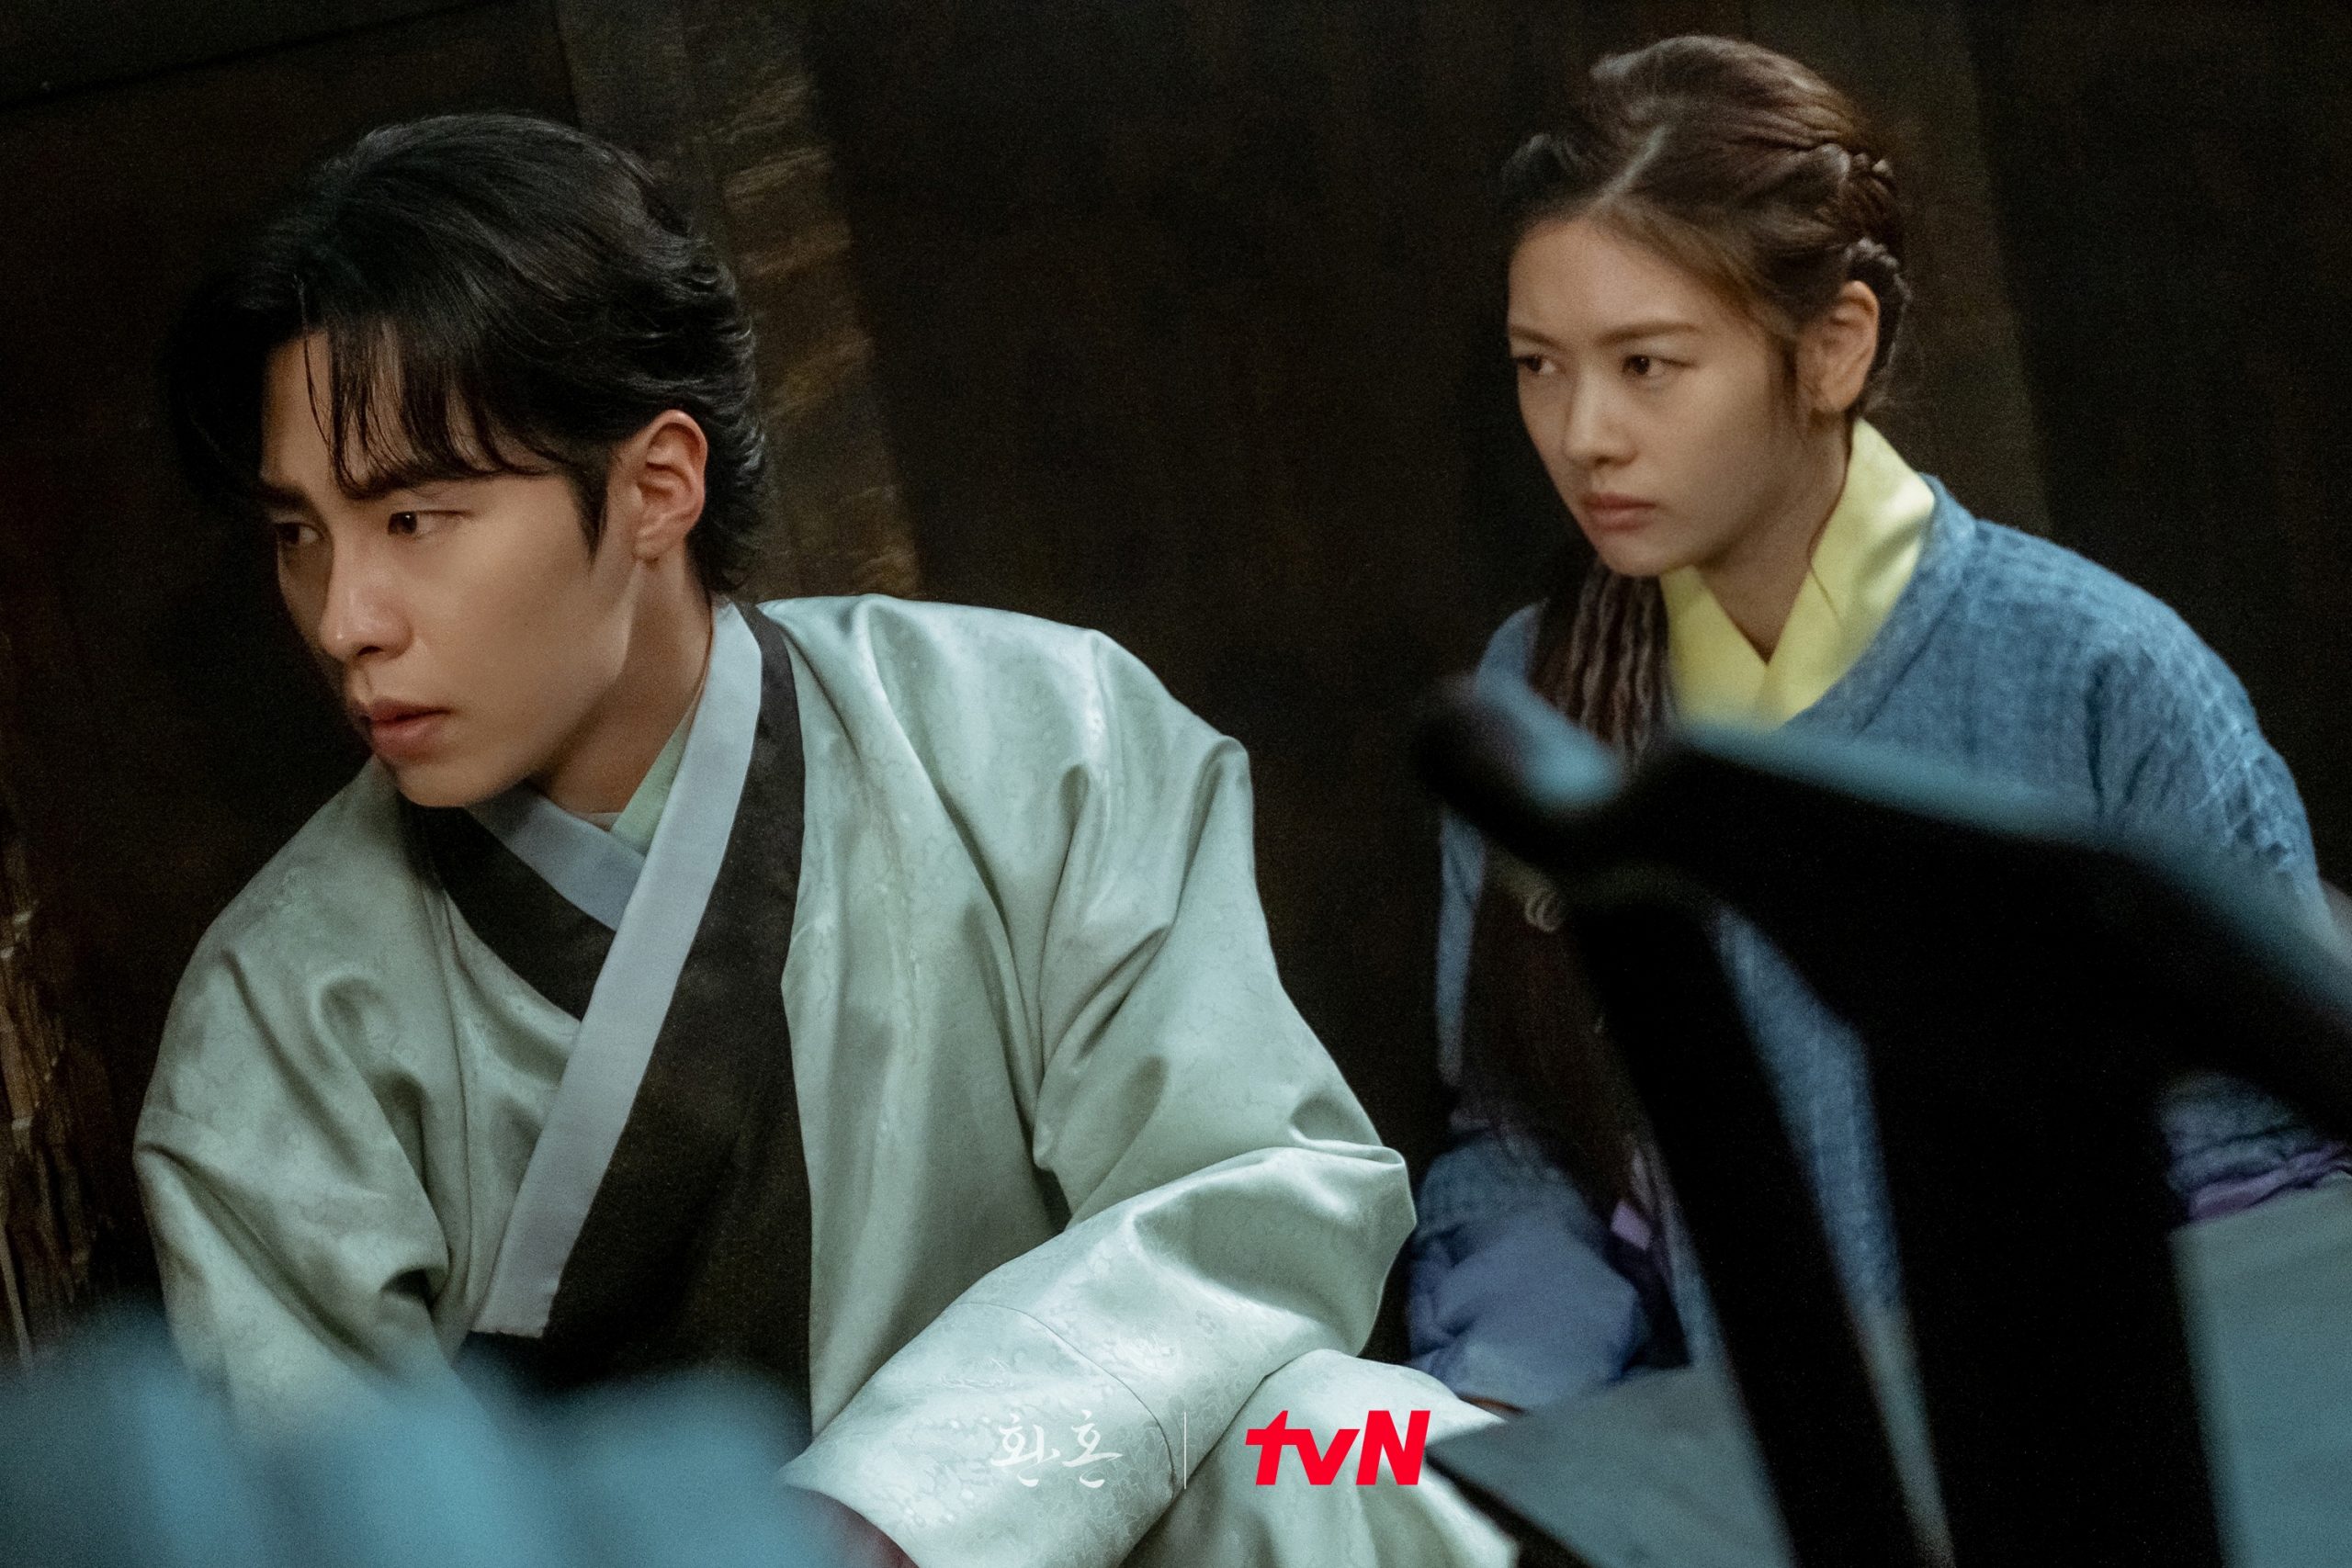 Lee Jae Wook And Jung So Min Find Themselves In A Harrowing Situation In “ Alchemy Of Souls”